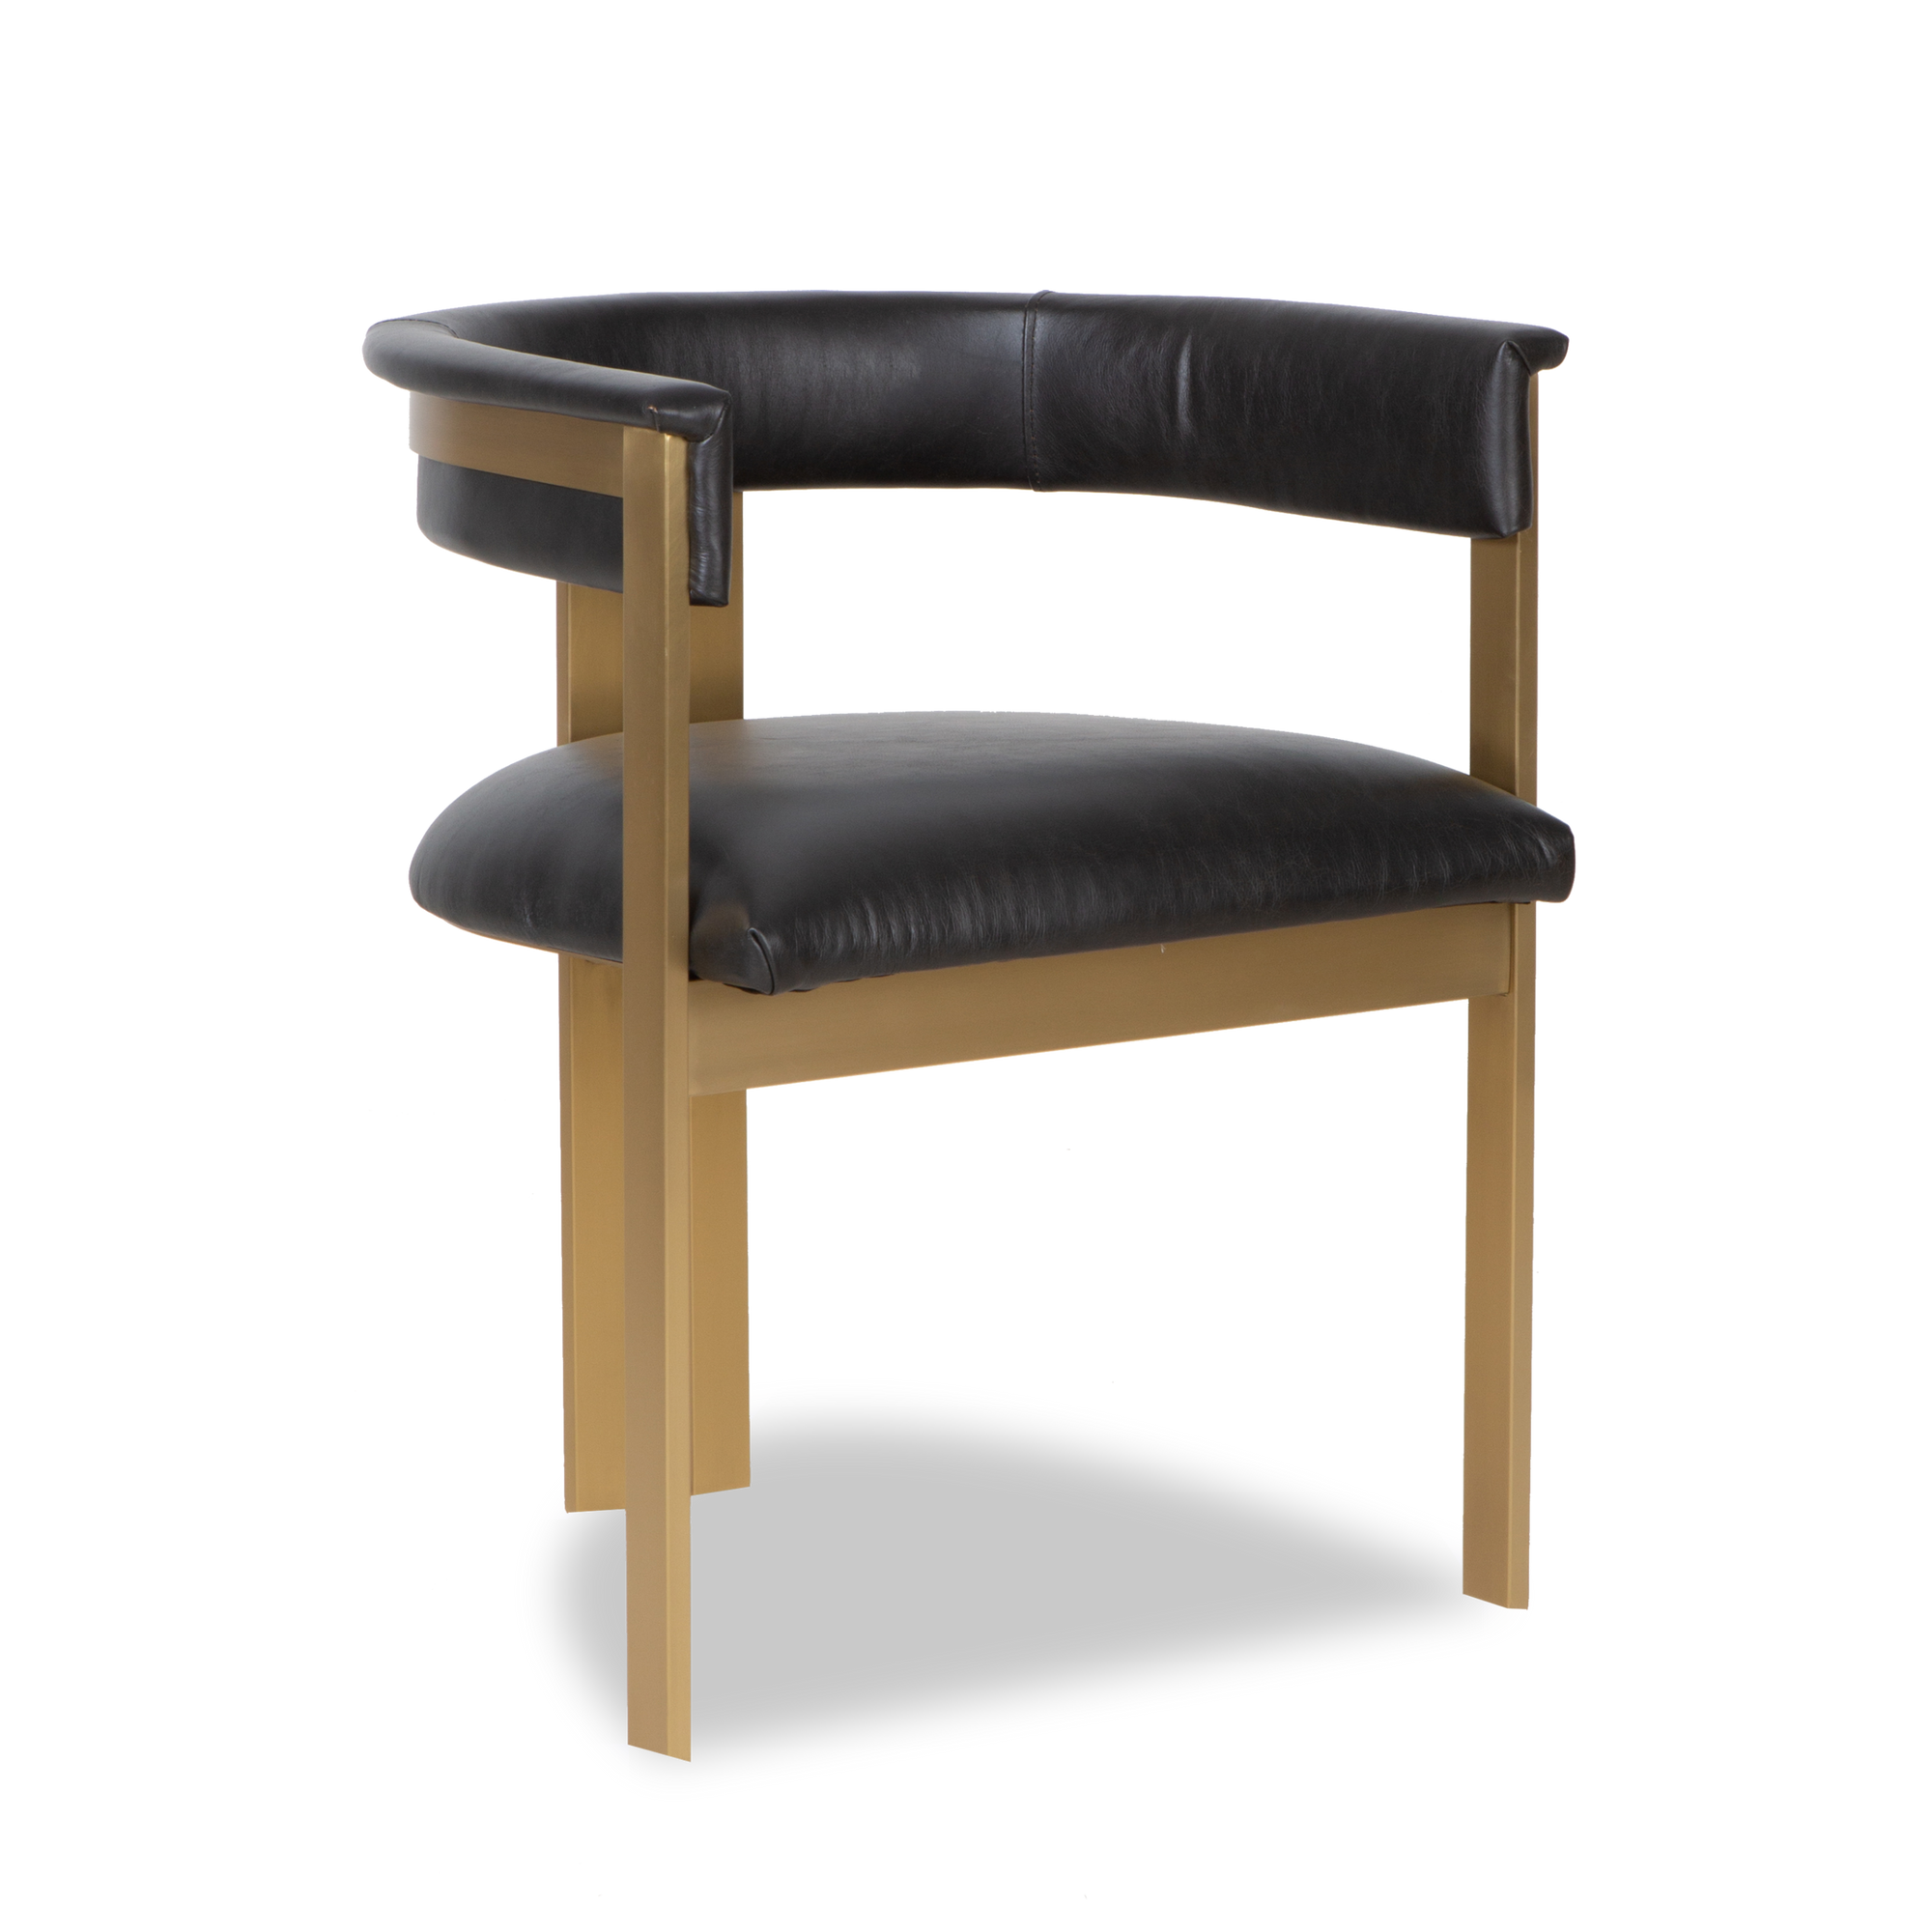 Artistic and elegant, the Durham Armchair is defined by its curved silhouette, brushed brass frame and black top-grain leather seat and back rest.